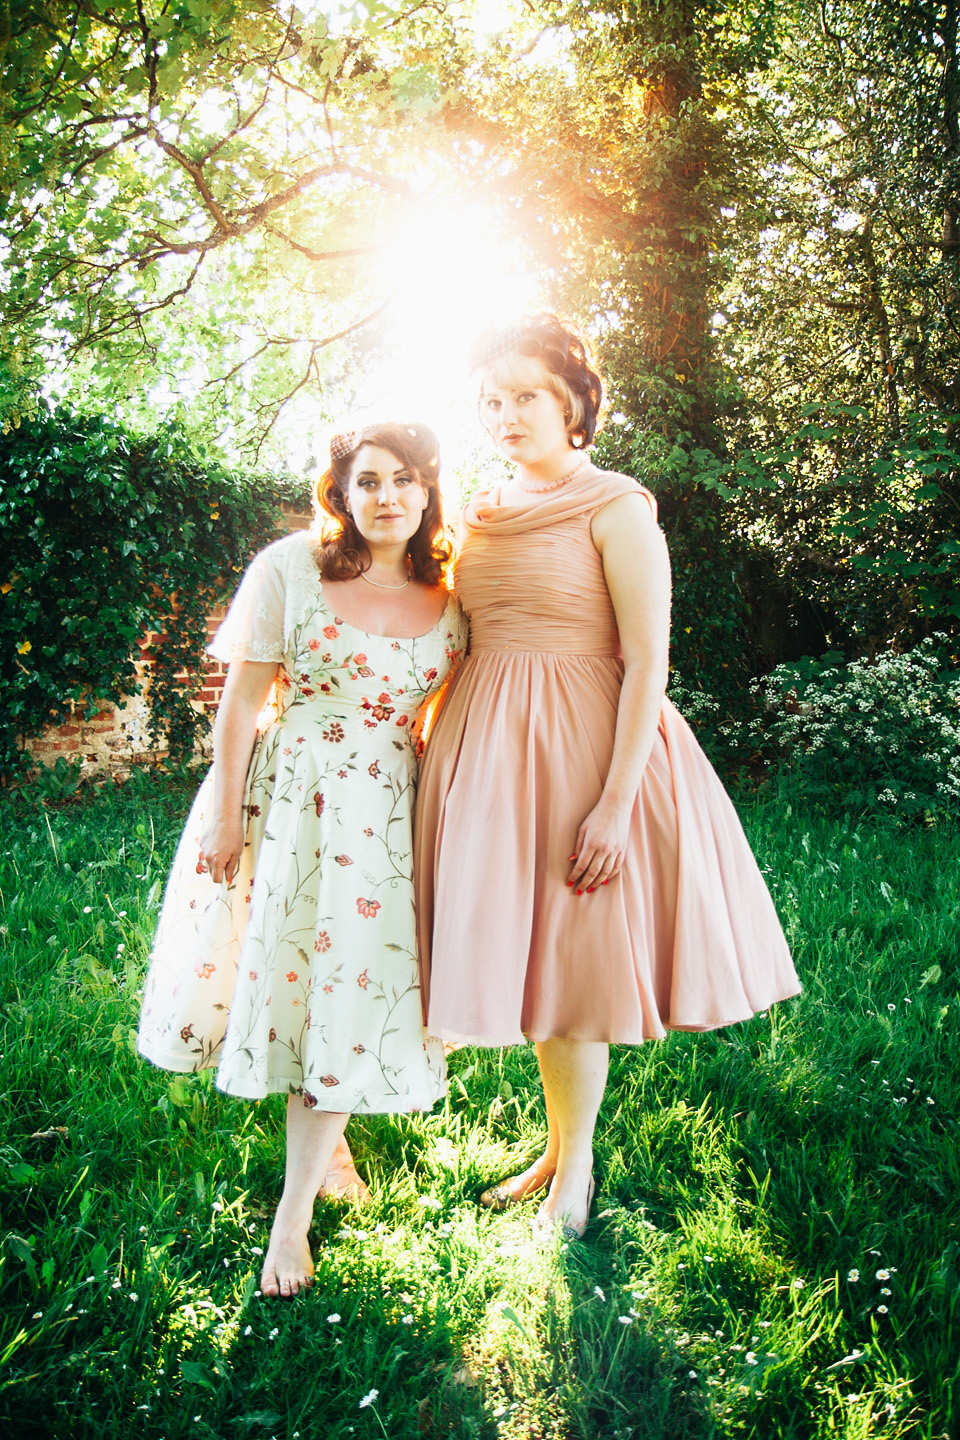 A 50's, Floral Style Wedding Dress for a Retro Inspired, Memorial Hall ...